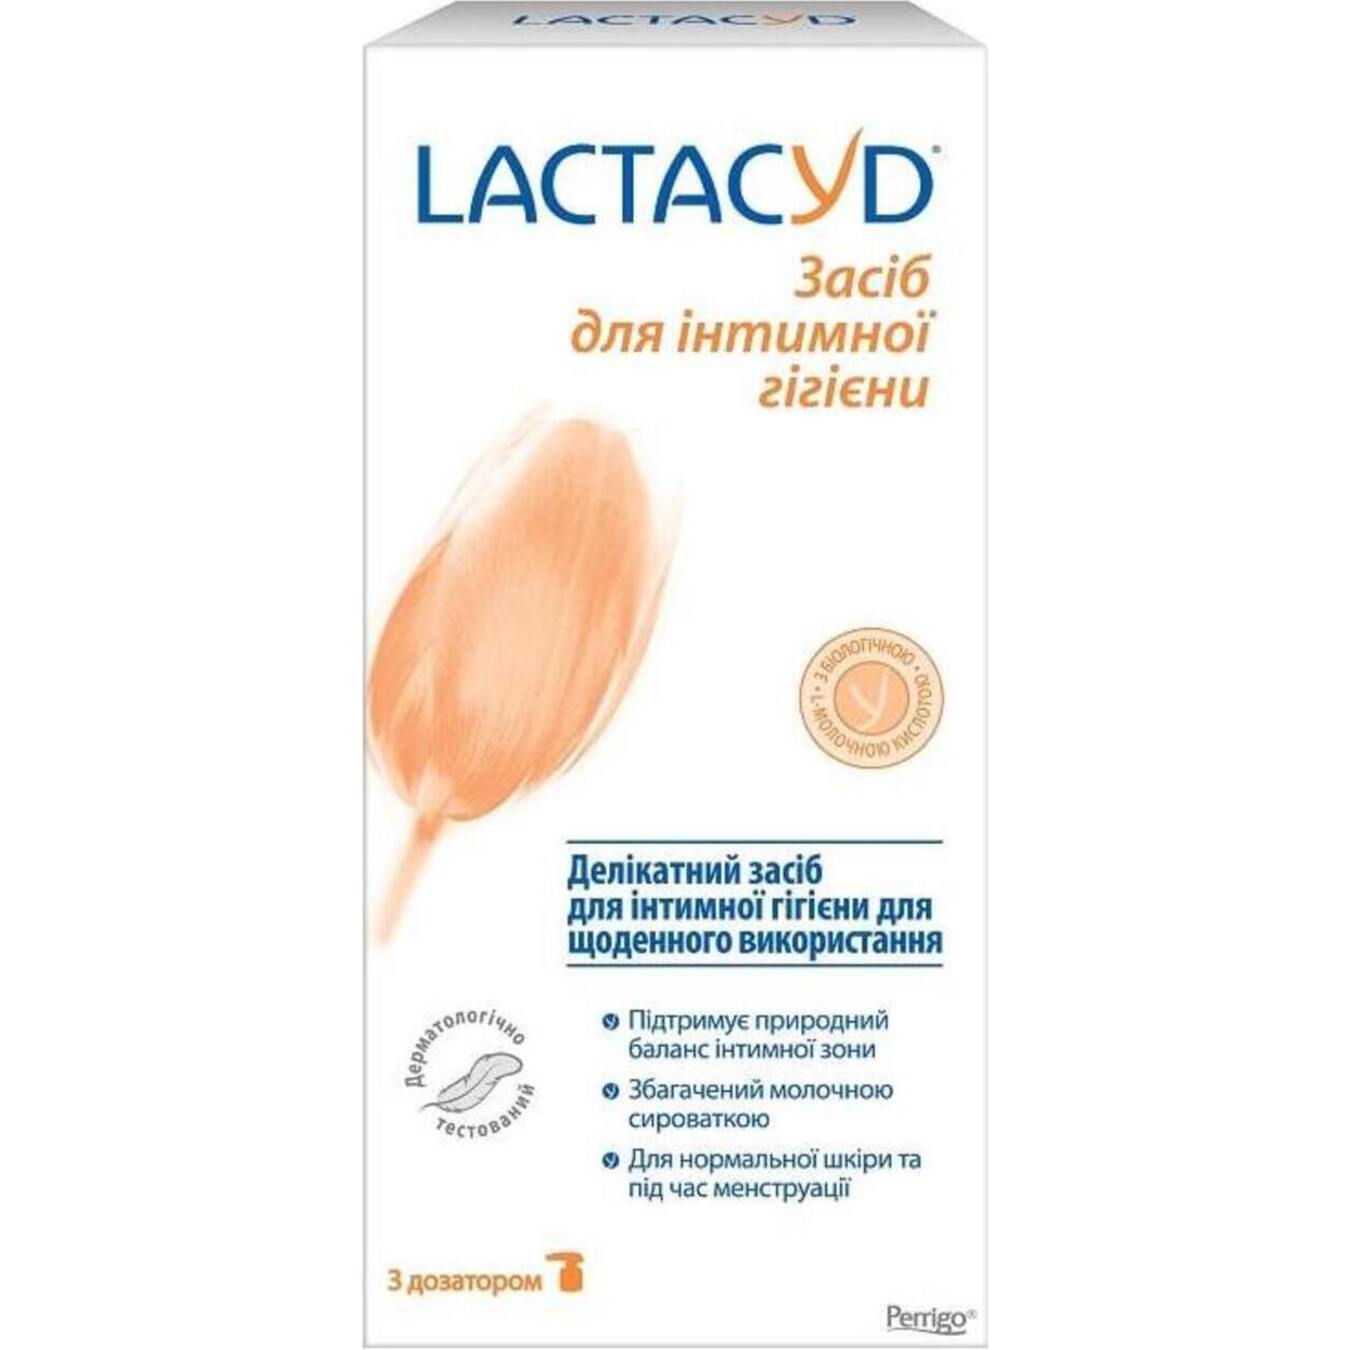 Lactacyd With Dispencer For Intimate Hygiene Gel 400ml